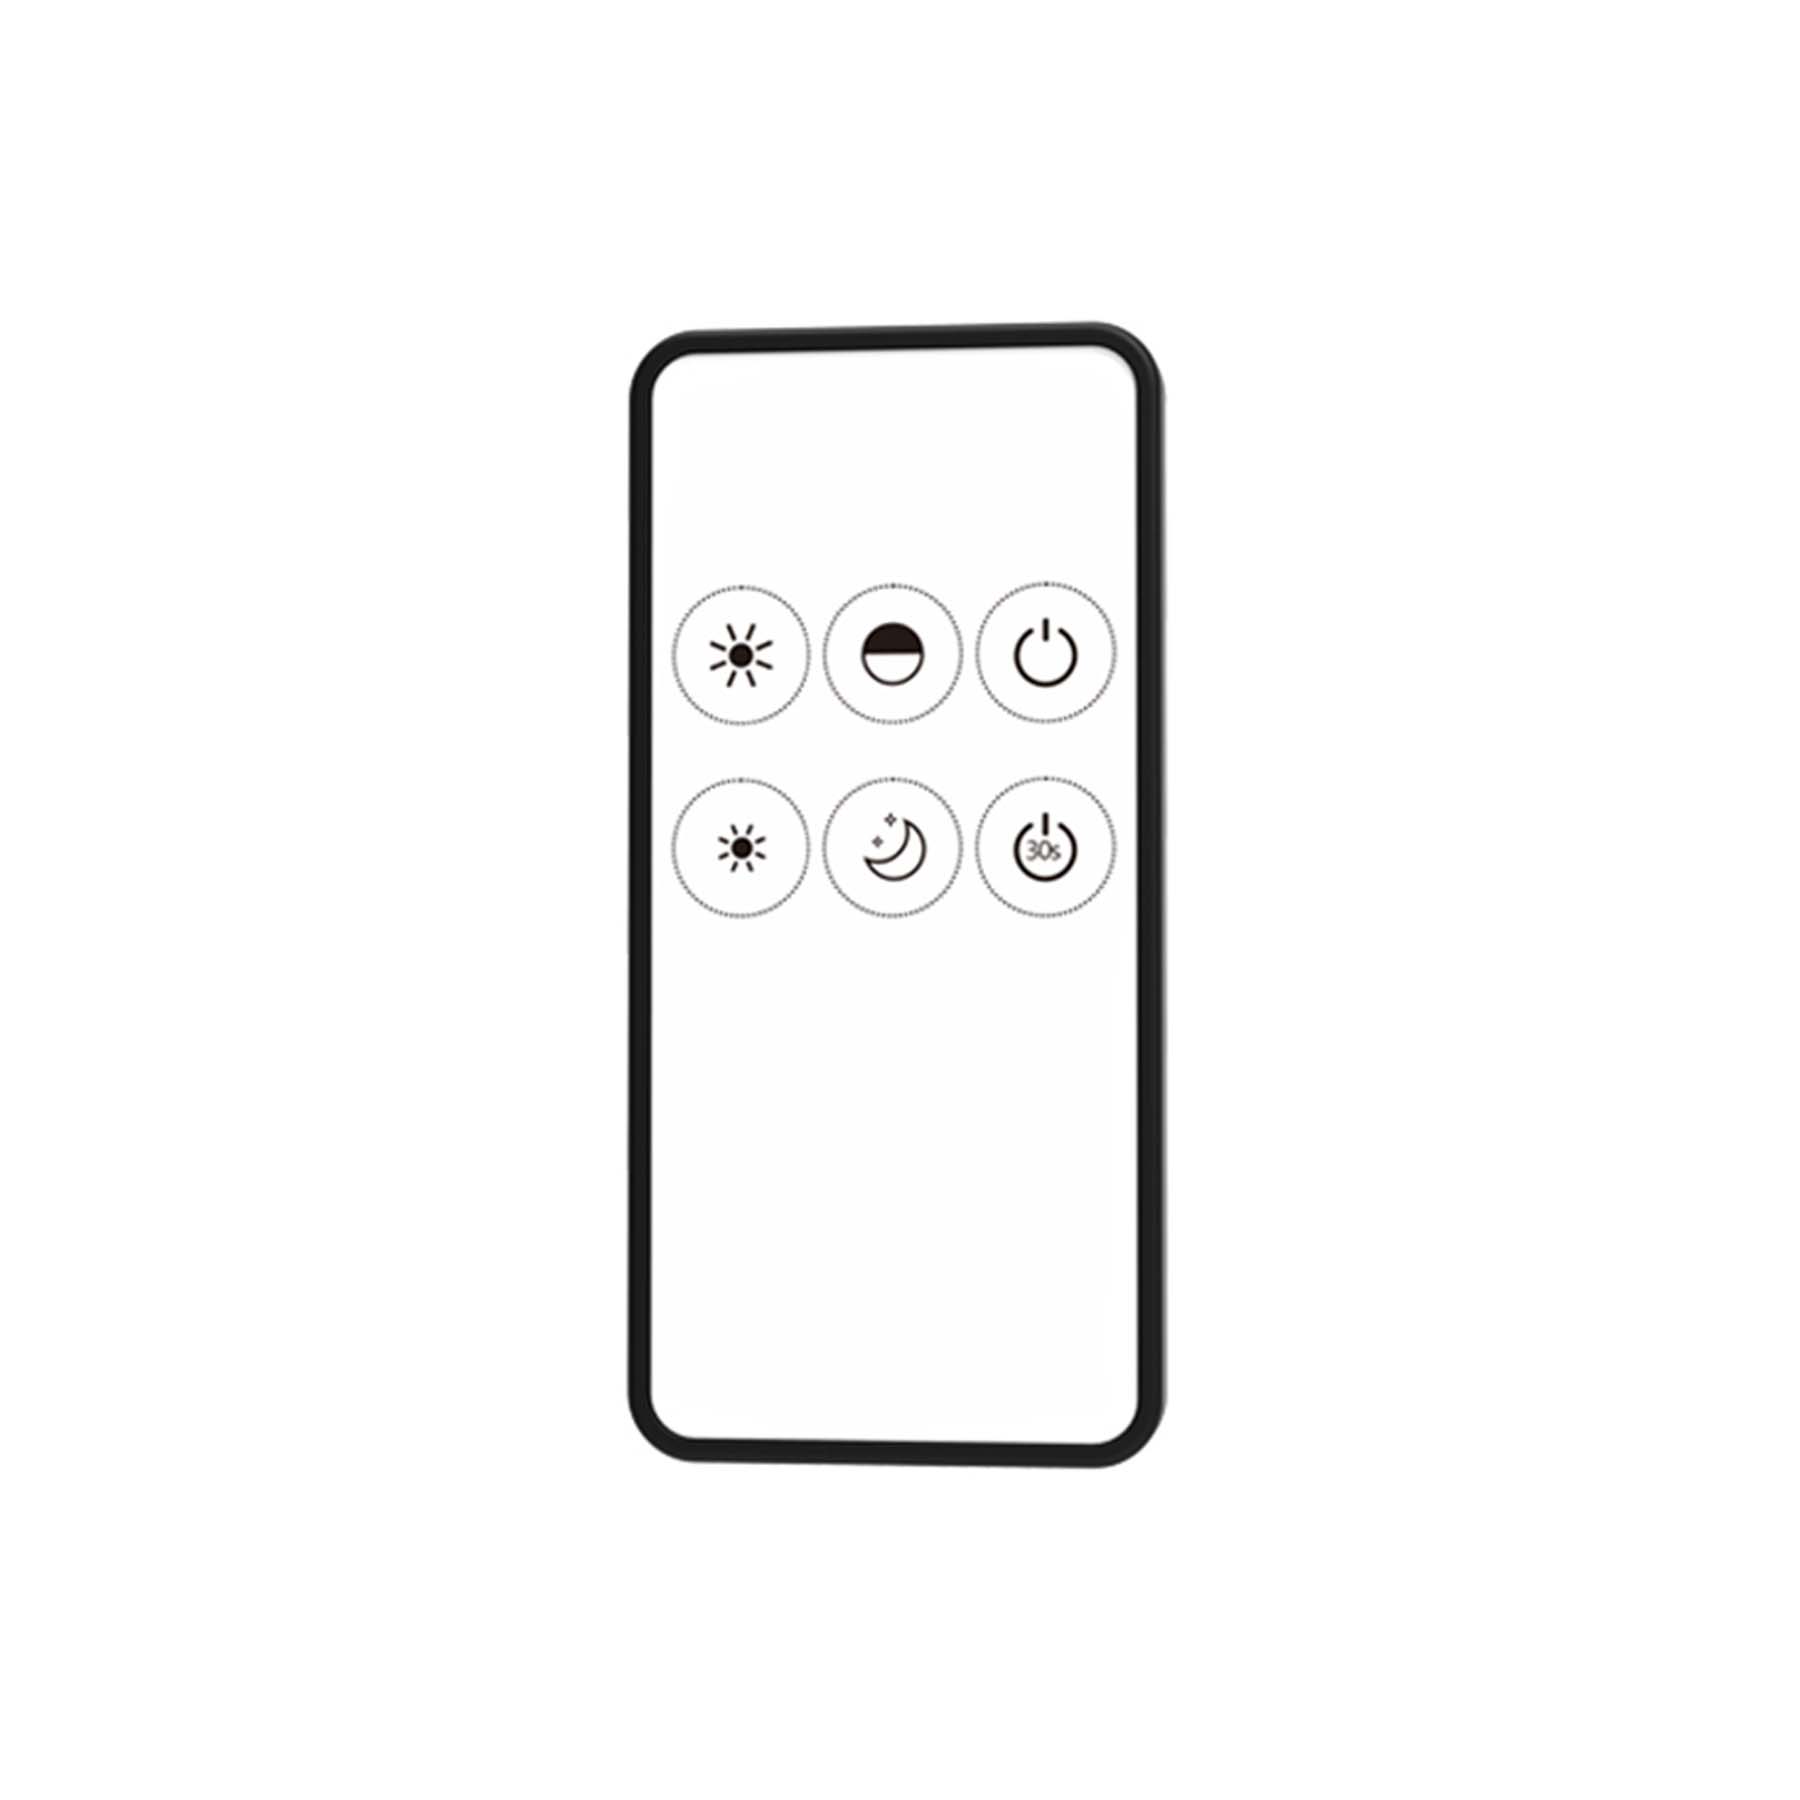 G.W.S. LED LED 12-24V DC Dimming Controller V1-M(D) + 1 Zone Remote Control RM1